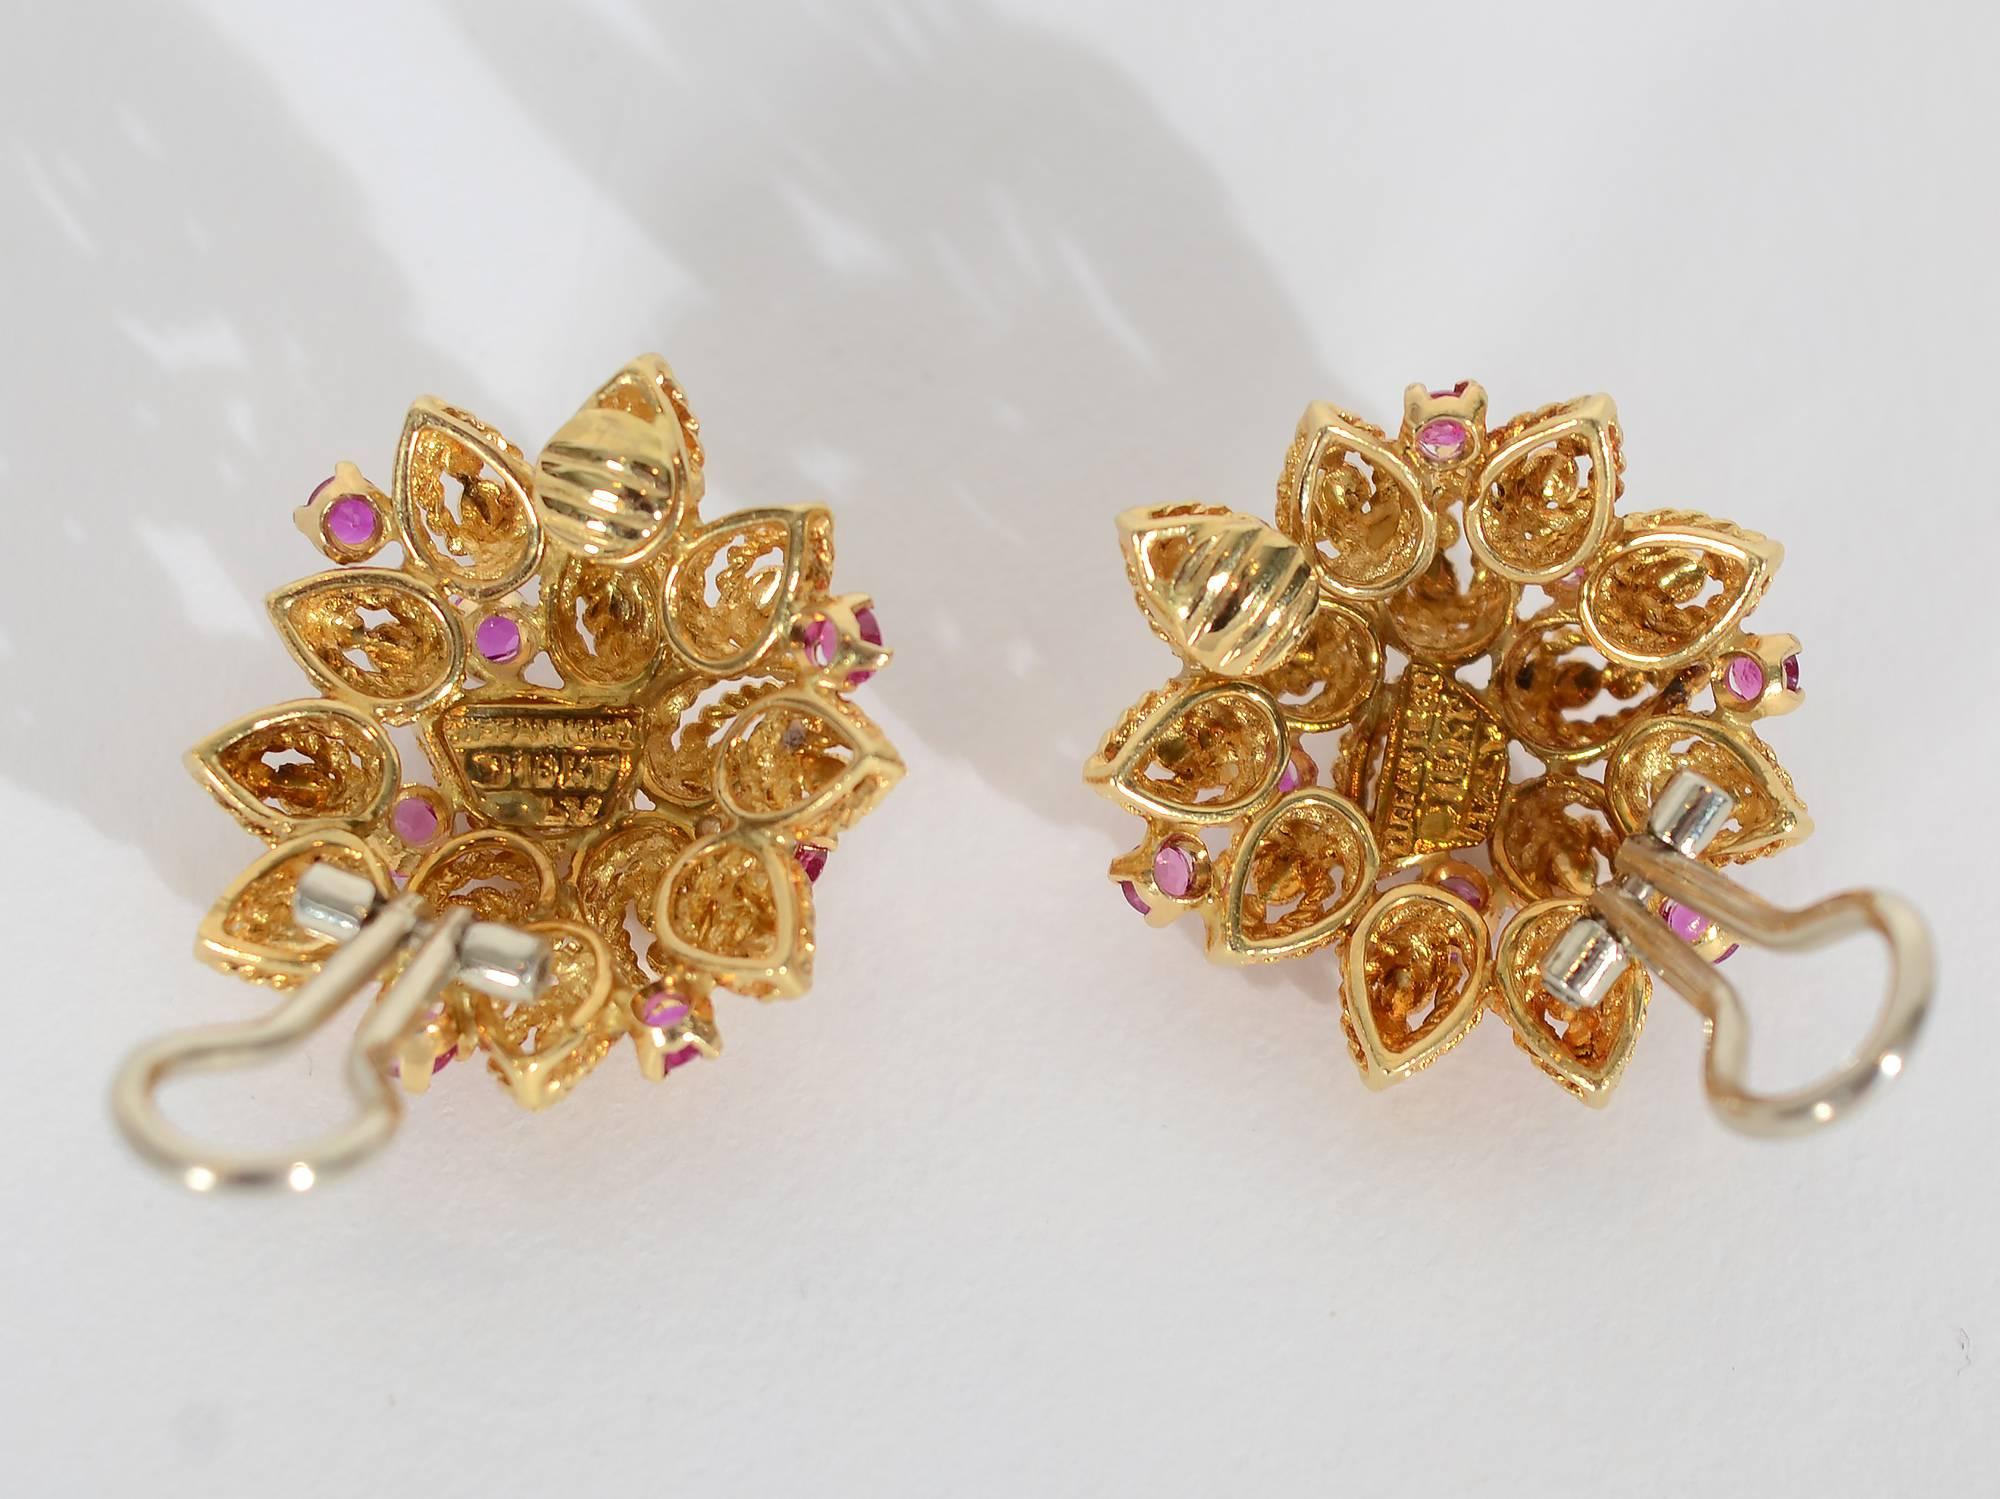 Overlapping pear shaped petals are highlighted with 7 rubies in each of these unusual Tiffany earrings. The petals are intricately made of two outlines of twisted gold centered with gold balls. Clip backs can be converted to posts. The earrings